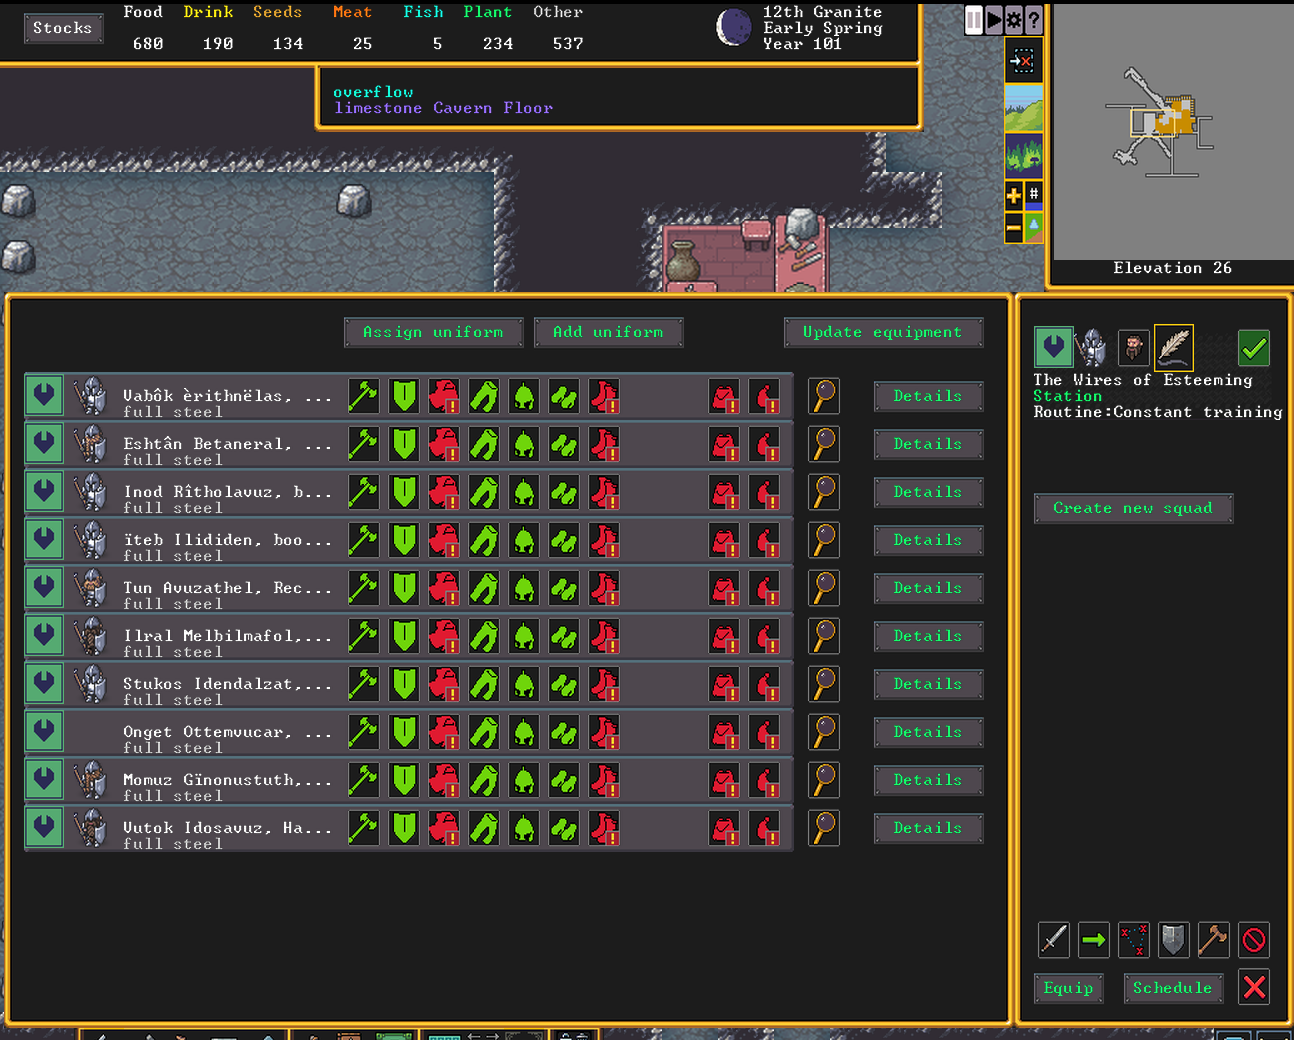 A cropped screenshot of Dwarf Fortress. The Squad Equipment screen shows that all 10 soldiers have the proper weapon, shield, legwear, headwear, and handwear, but that bodywear and footwear are unavailable. The date is 12th Granite, Early Spring, Year 101